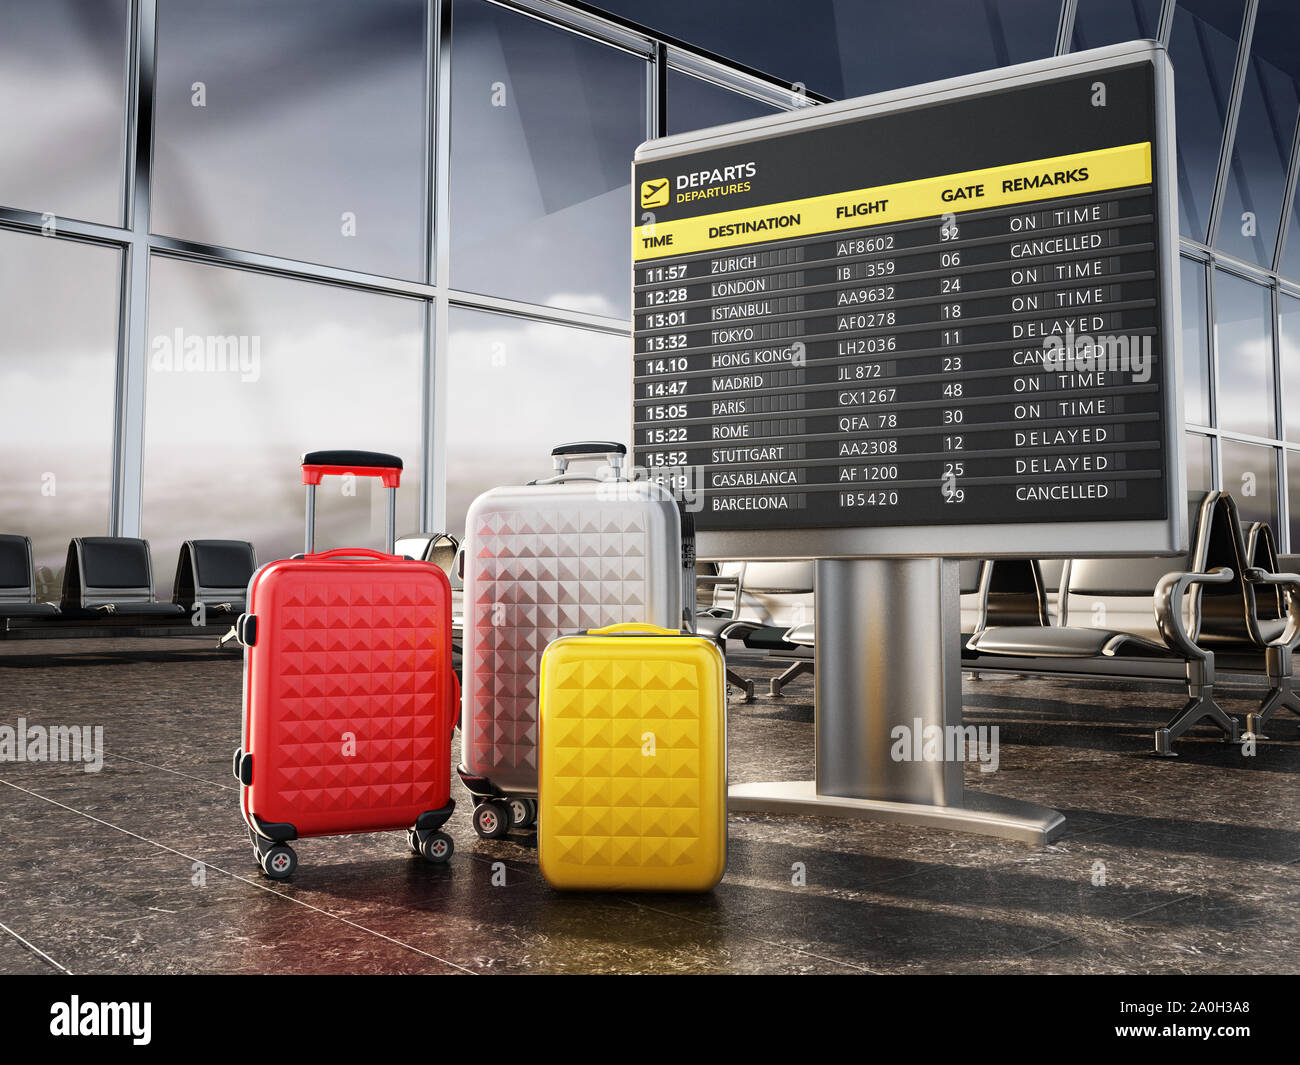 Airport boarding sign, and luggages inside airport waiting room. 3D illustration. Stock Photo